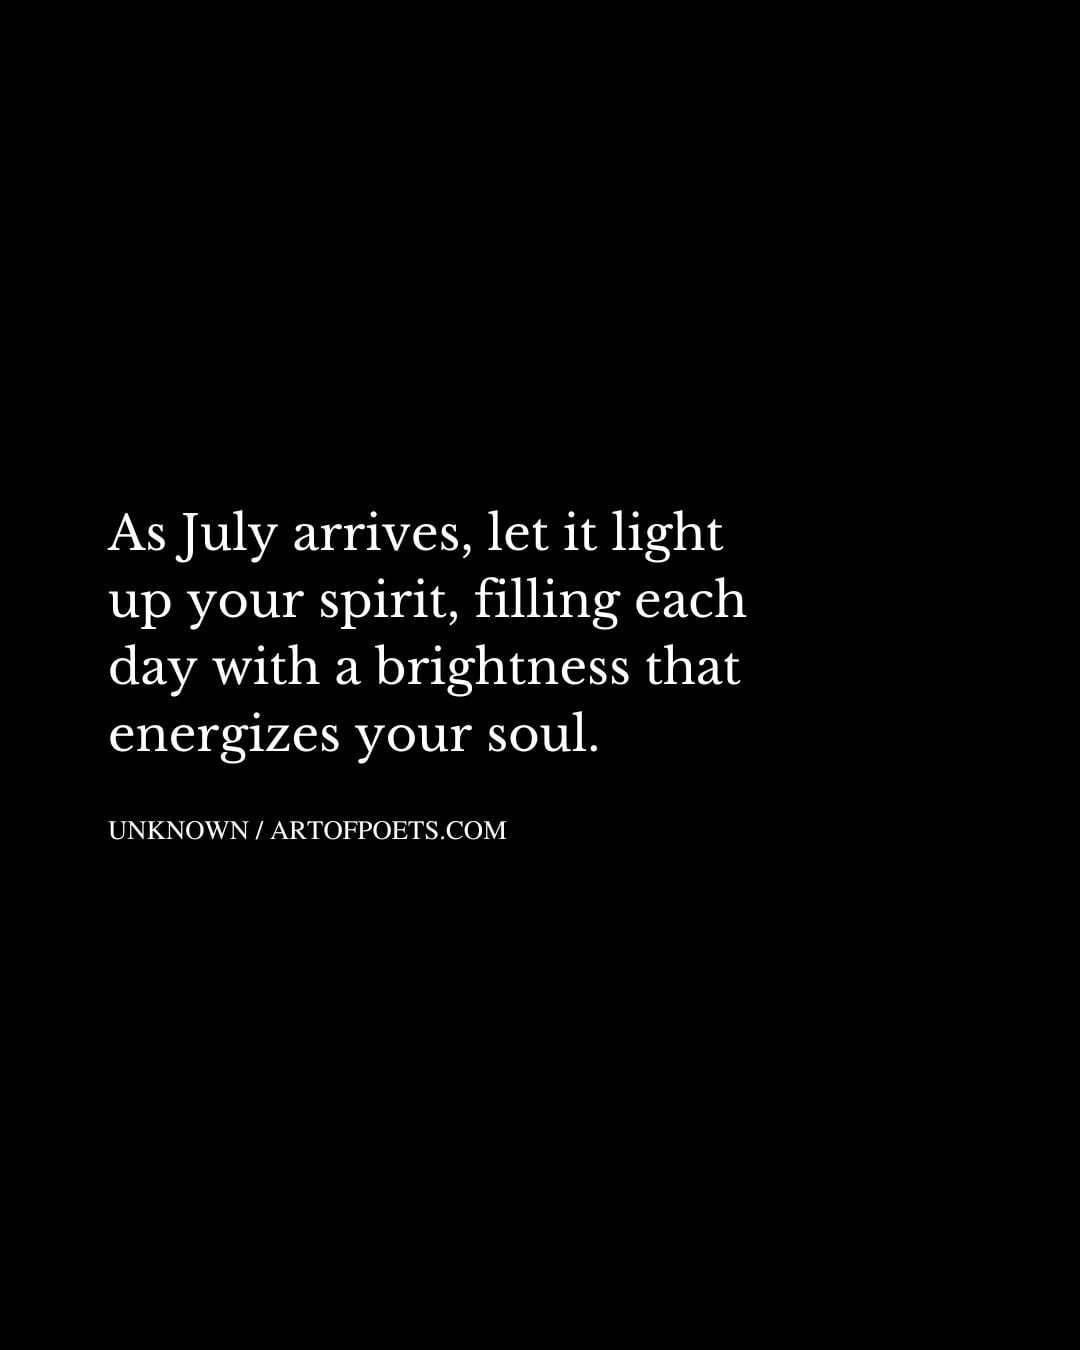 As July arrives let it light up your spirit filling each day with a brightness that energizes your soul